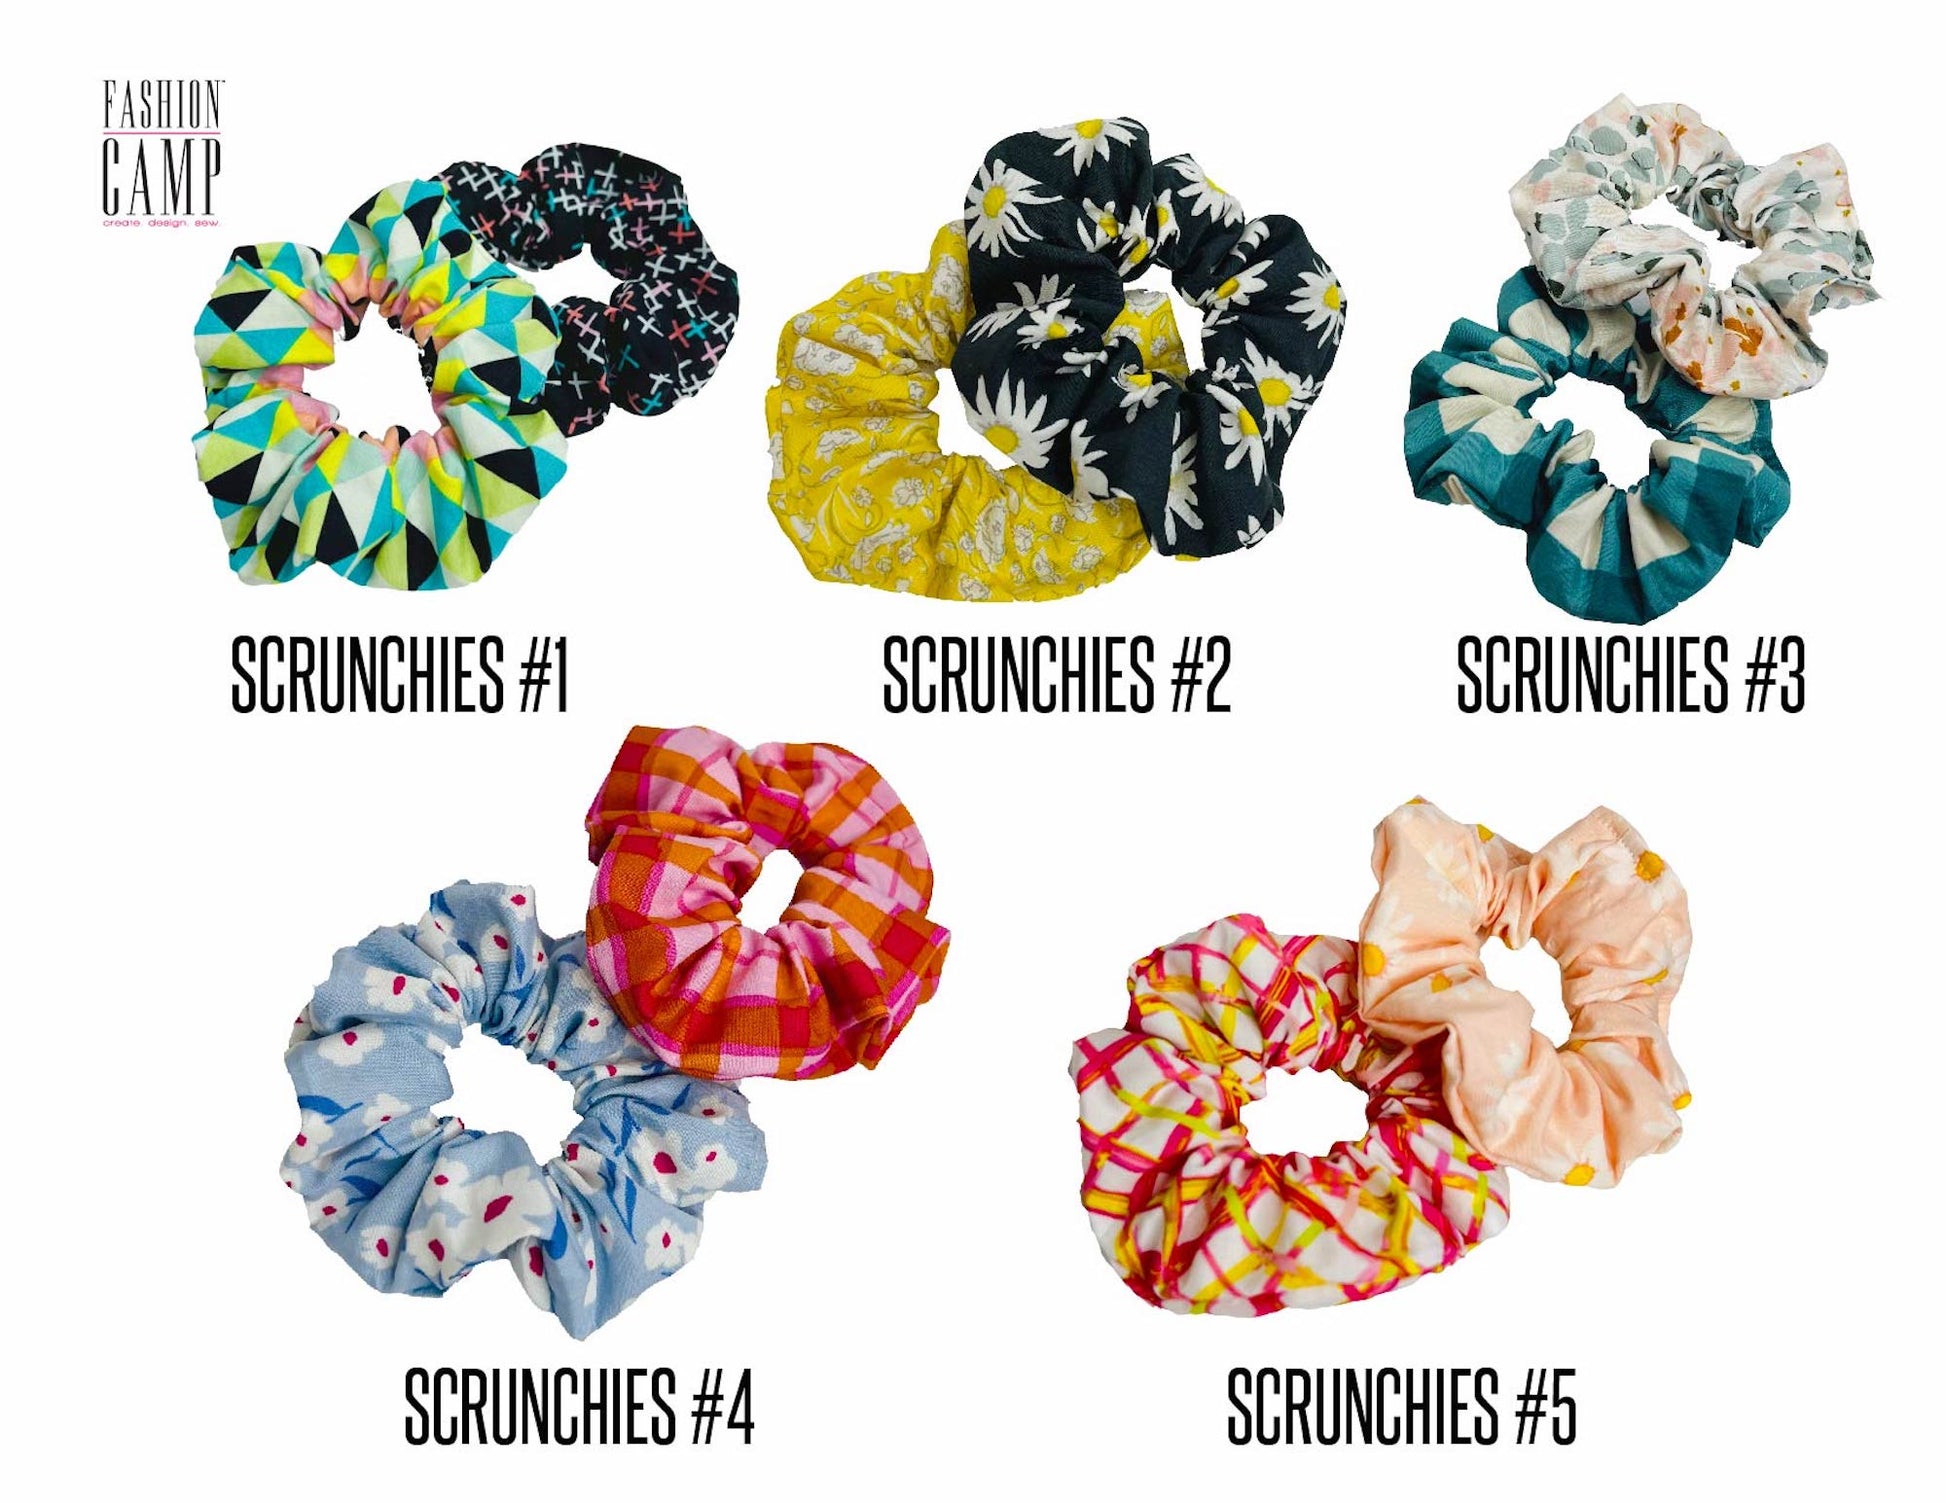 Scrunchie Beginner Sewing Kit - Blossom - Sewing Project Kit for